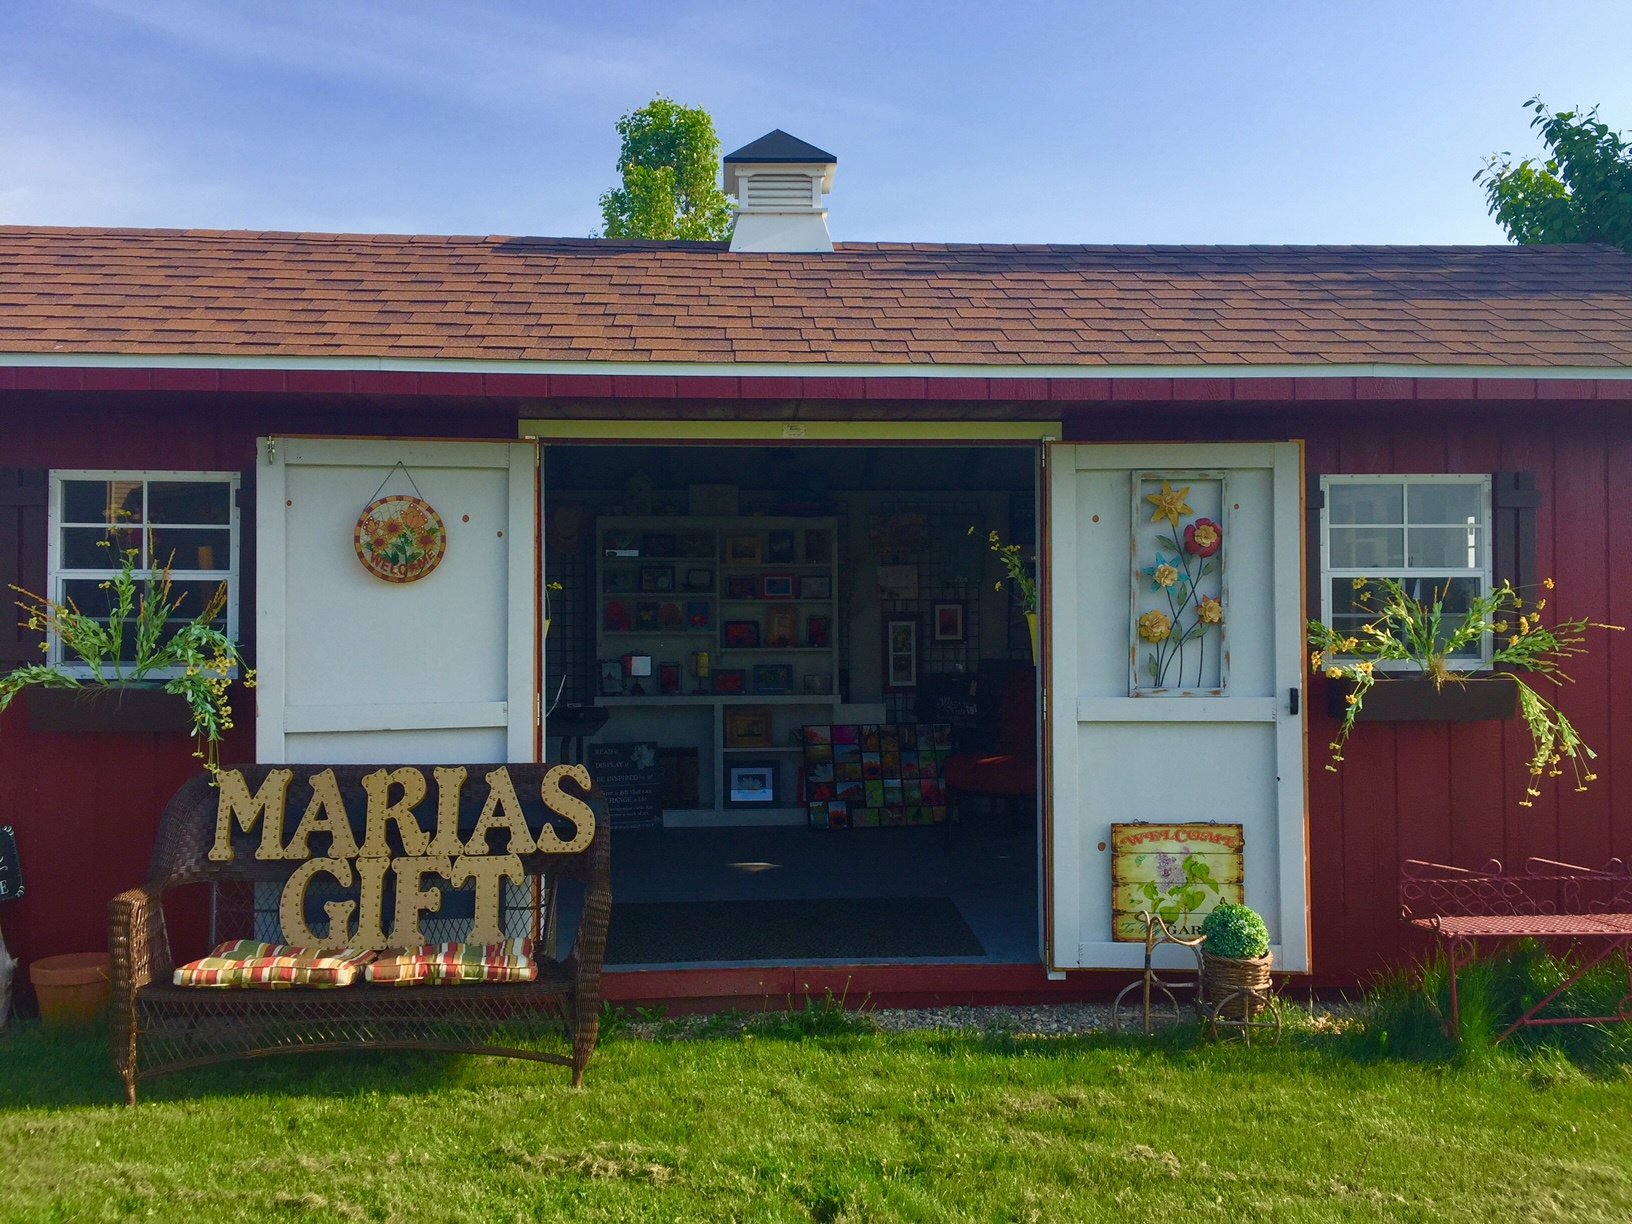 Maria's Gift 'A gift shop with a purpose.'